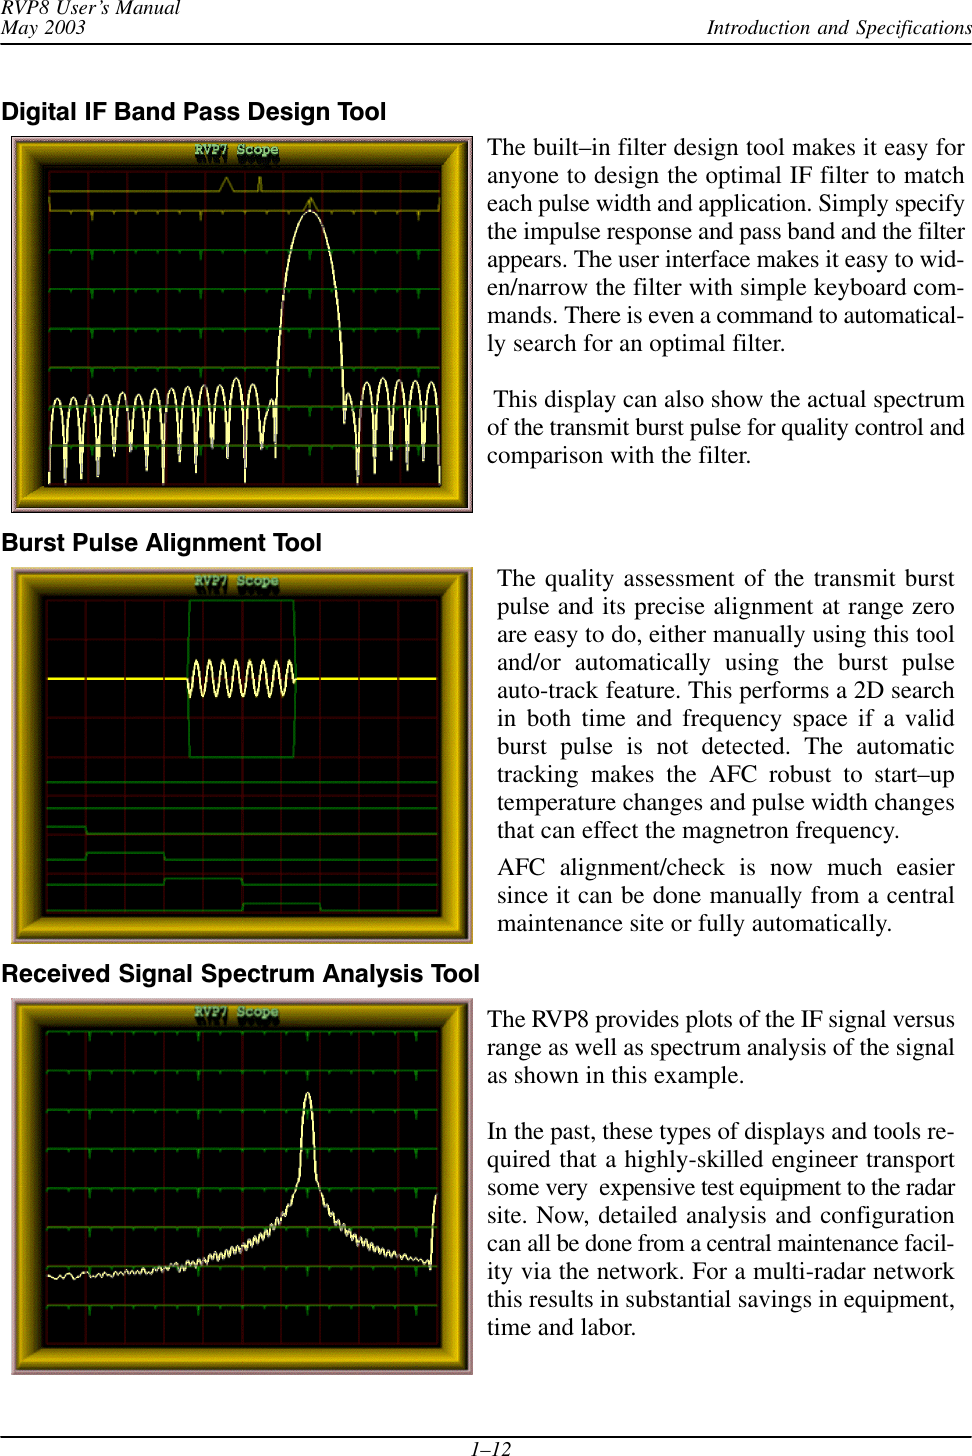 Introduction and SpecificationsRVP8 User’s ManualMay 20031–12Digital IF Band Pass Design ToolThe built–in filter design tool makes it easy foranyone to design the optimal IF filter to matcheach pulse width and application. Simply specifythe impulse response and pass band and the filterappears. The user interface makes it easy to wid-en/narrow the filter with simple keyboard com-mands. There is even a command to automatical-ly search for an optimal filter. This display can also show the actual spectrumof the transmit burst pulse for quality control andcomparison with the filter.Burst Pulse Alignment ToolThe quality assessment of the transmit burstpulse and its precise alignment at range zeroare easy to do, either manually using this tooland/or automatically using the burst pulseauto-track feature. This performs a 2D searchin both time and frequency space if a validburst pulse is not detected. The automatictracking makes the AFC robust to start–uptemperature changes and pulse width changesthat can effect the magnetron frequency.AFC alignment/check is now much easiersince it can be done manually from a centralmaintenance site or fully automatically.Received Signal Spectrum Analysis ToolThe RVP8 provides plots of the IF signal versusrange as well as spectrum analysis of the signalas shown in this example.In the past, these types of displays and tools re-quired that a highly-skilled engineer transportsome very  expensive test equipment to the radarsite. Now, detailed analysis and configurationcan all be done from a central maintenance facil-ity via the network. For a multi-radar networkthis results in substantial savings in equipment,time and labor.